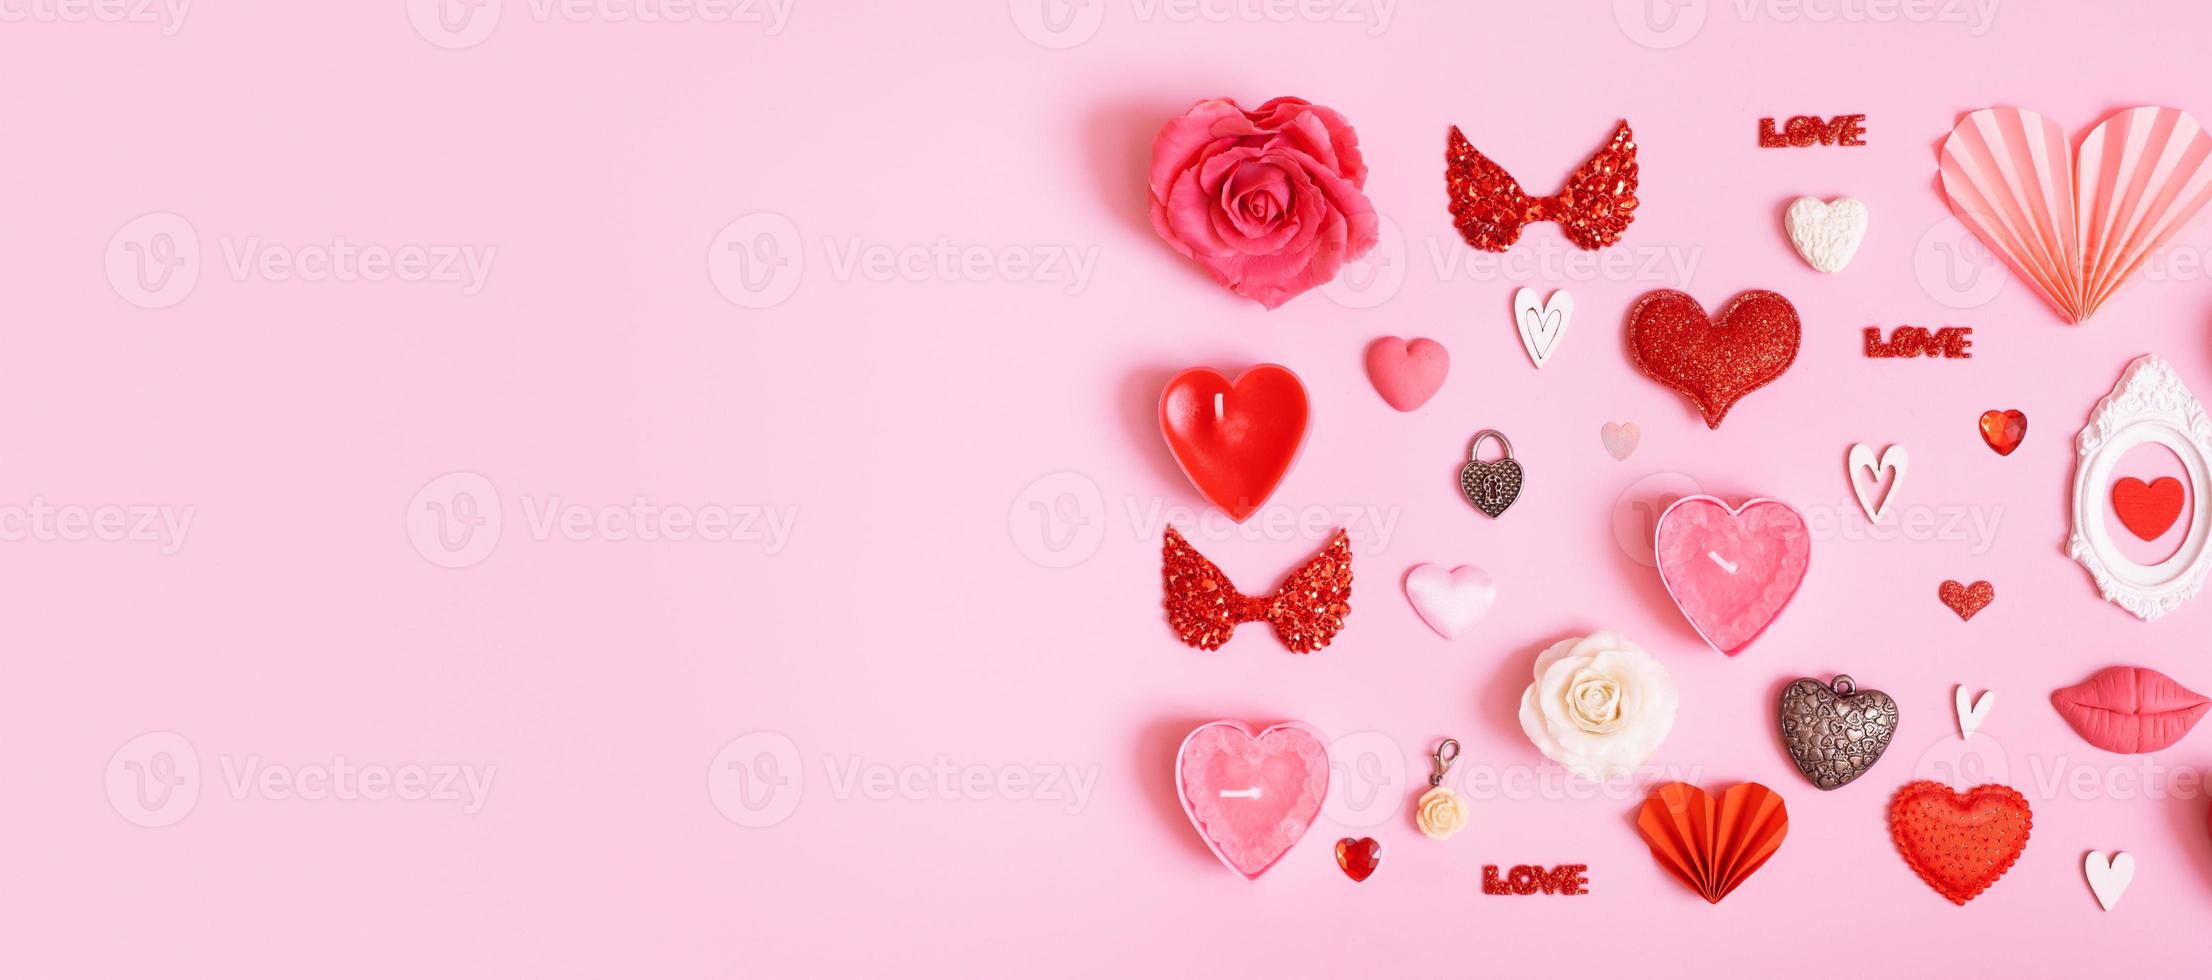 Many differente hearts and valentines day symbols elements top view. Creative valentines day banner background photo